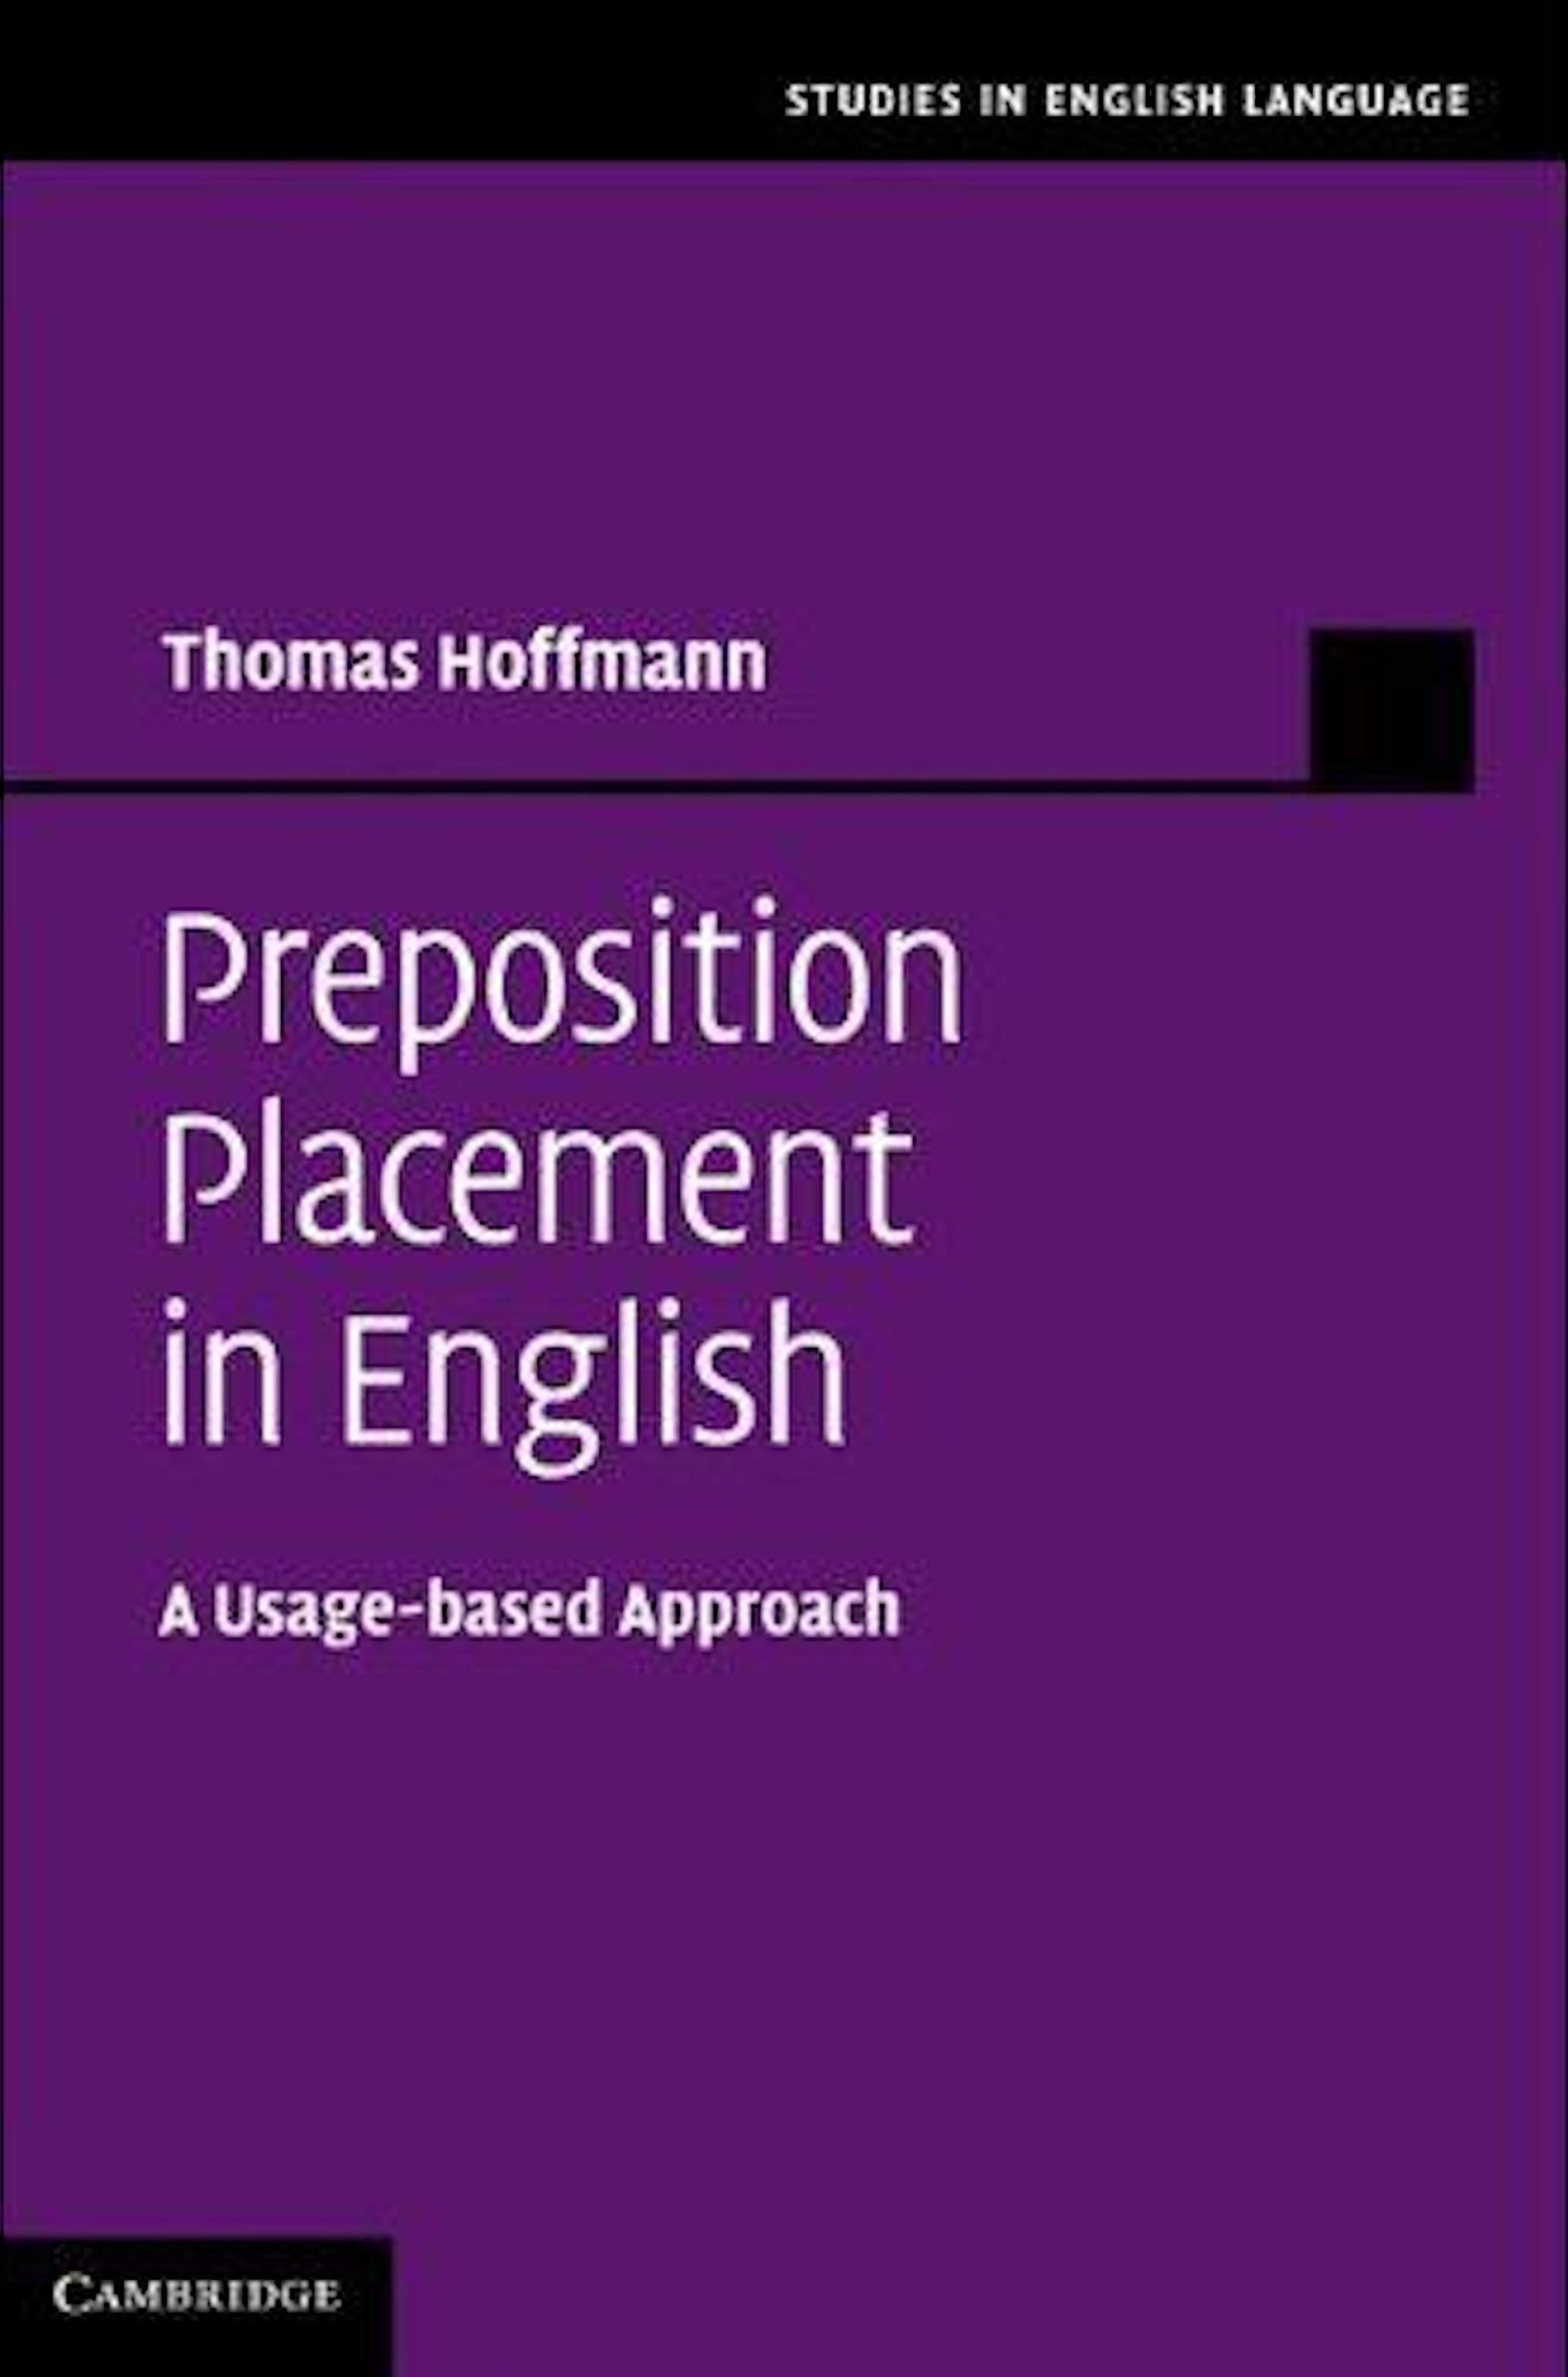 [Translate to Englisch:] Preposition Placement